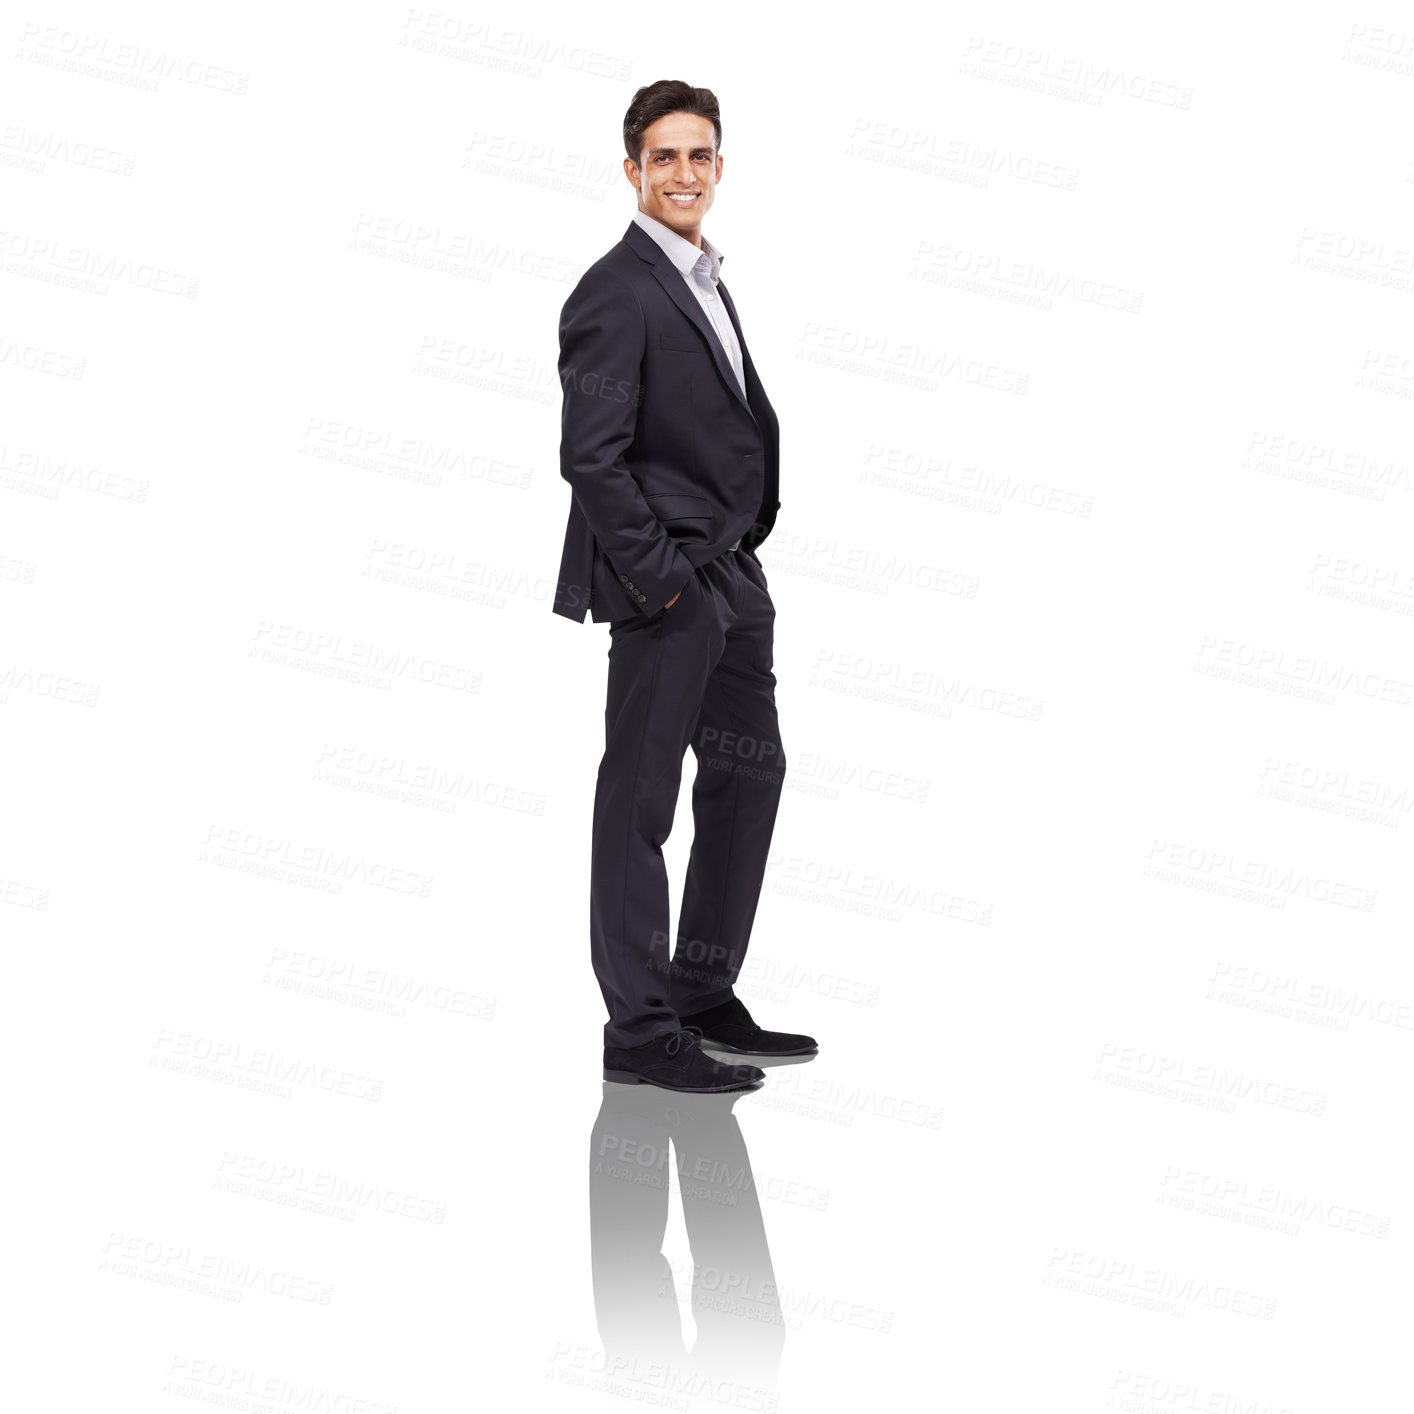 Buy stock photo Business man, suit and pose in professional portrait with smile and hands in pocket on png transparent background. Corporate fashion, entrepreneur and career success with confidence and ambition